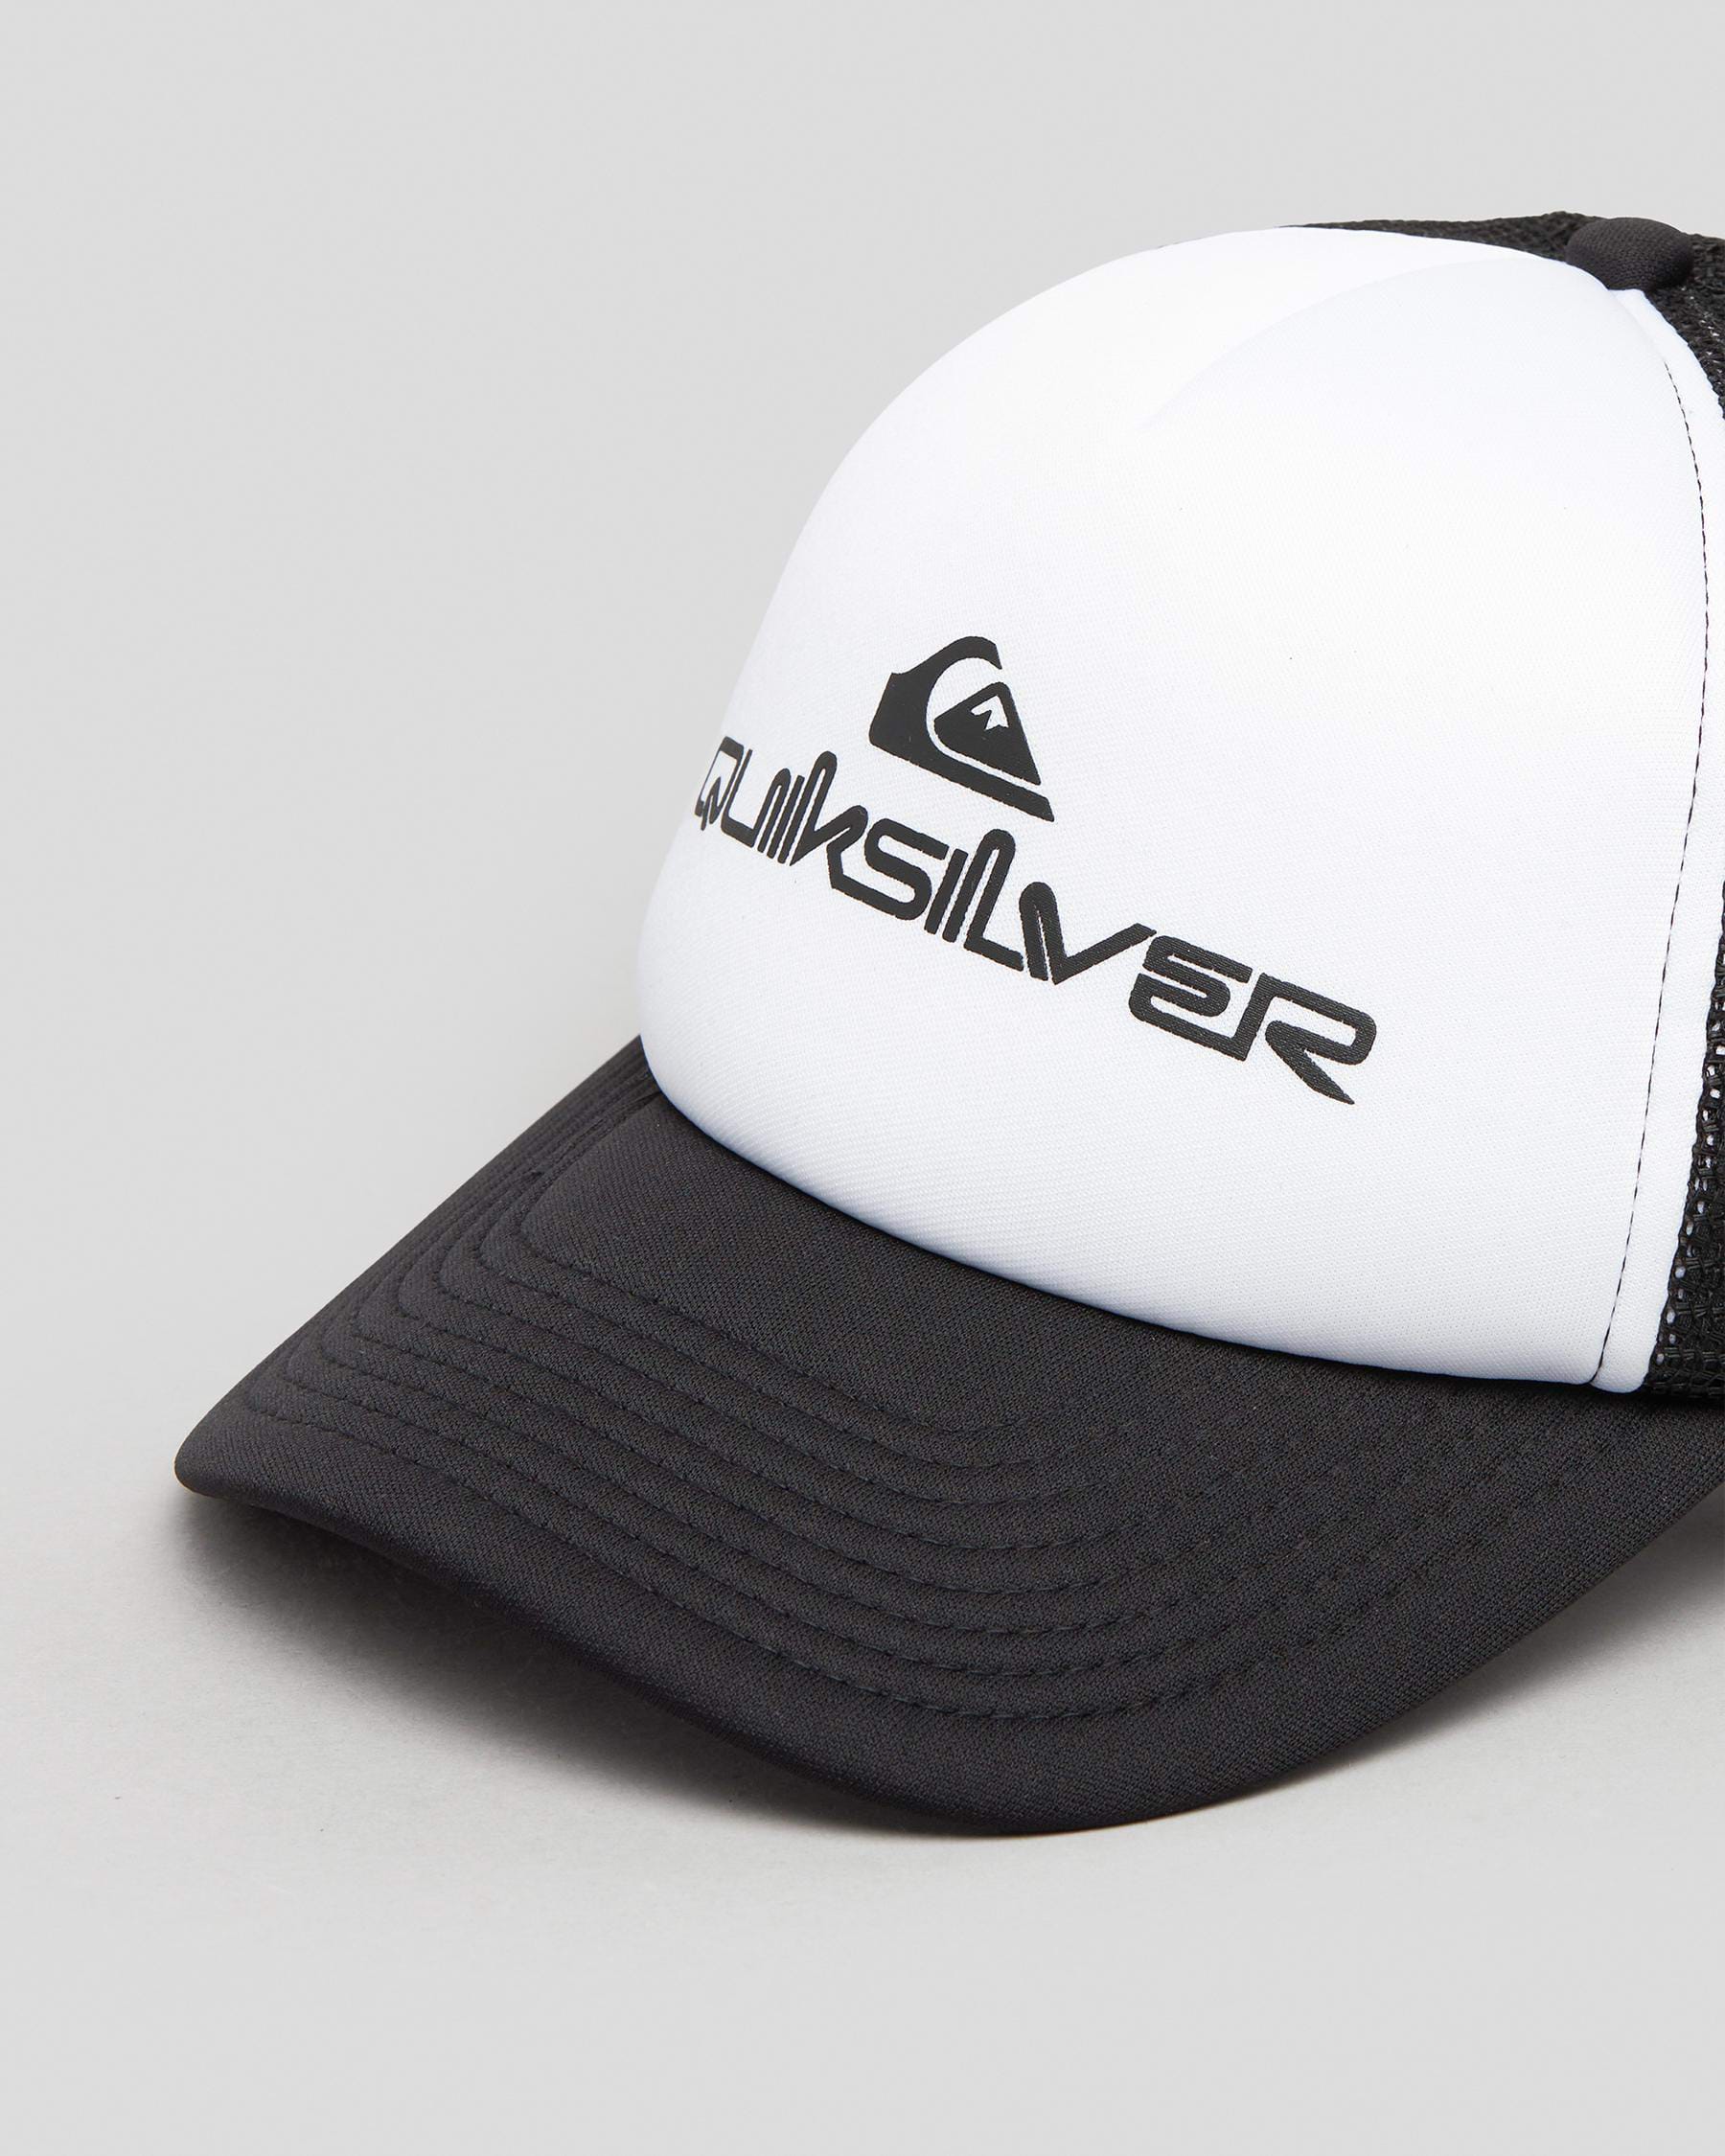 Cap Easy Beach - States In Returns United & Quiksilver Omnistack White Shipping FREE* City - Trucker